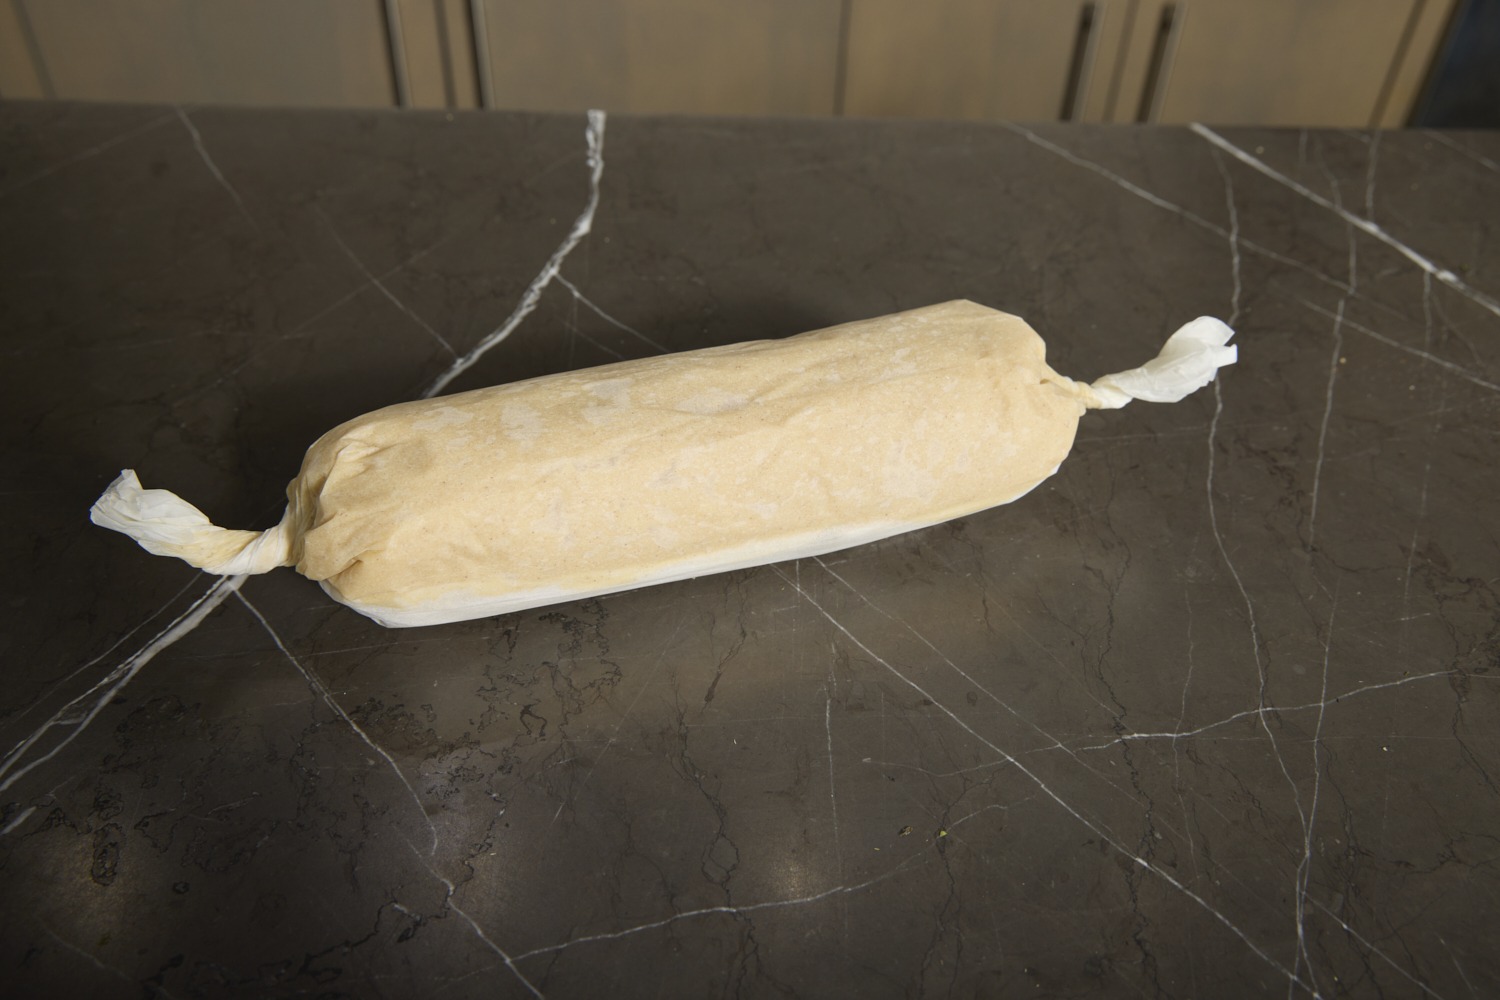 the finished butter roll